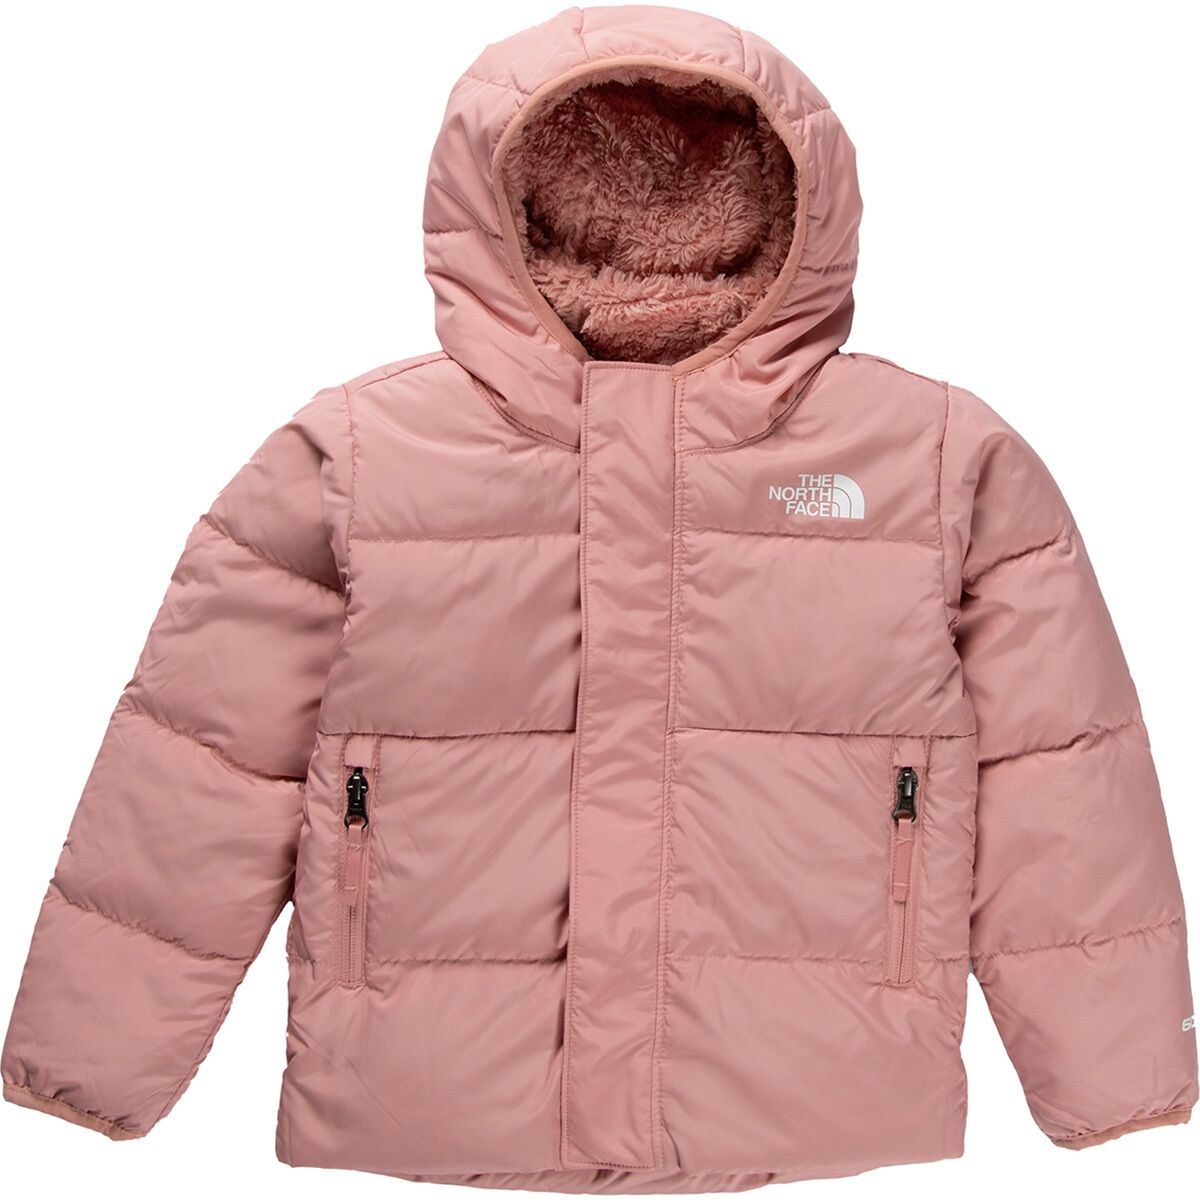 The North Face North Down Hooded Jacket - Toddlers